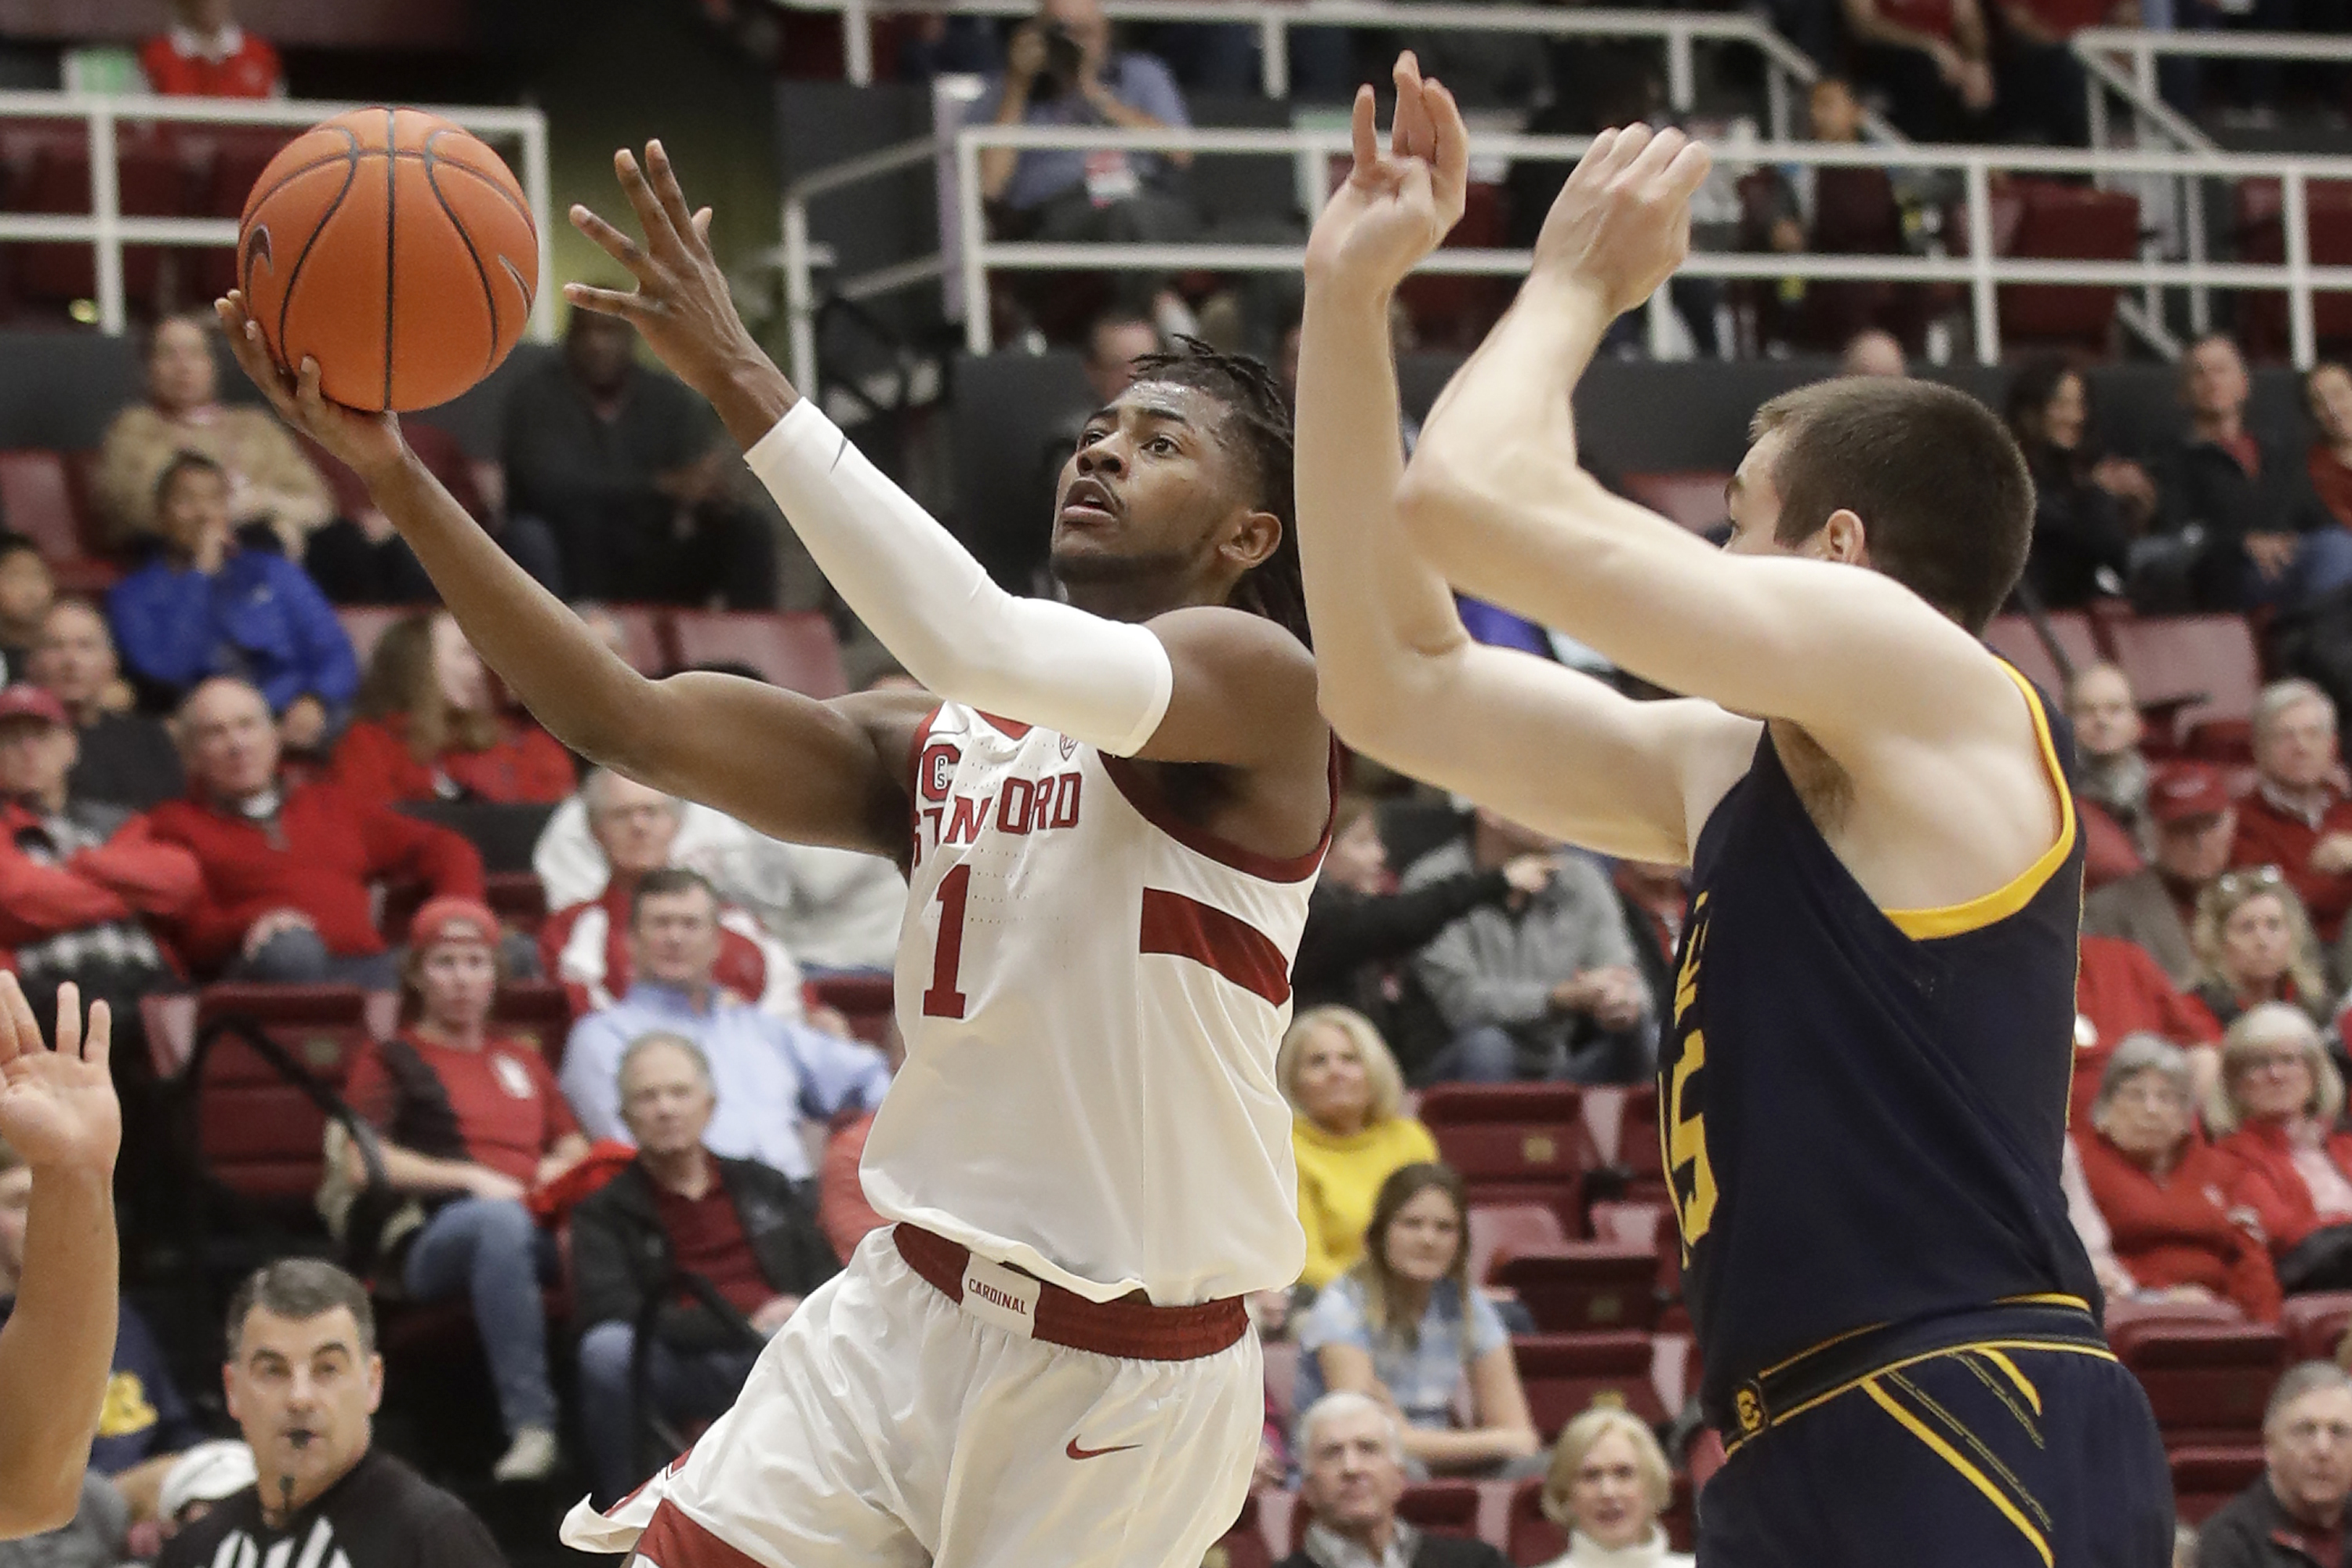 Davis nets 20 in Stanford’s 68-52 victory over Cal